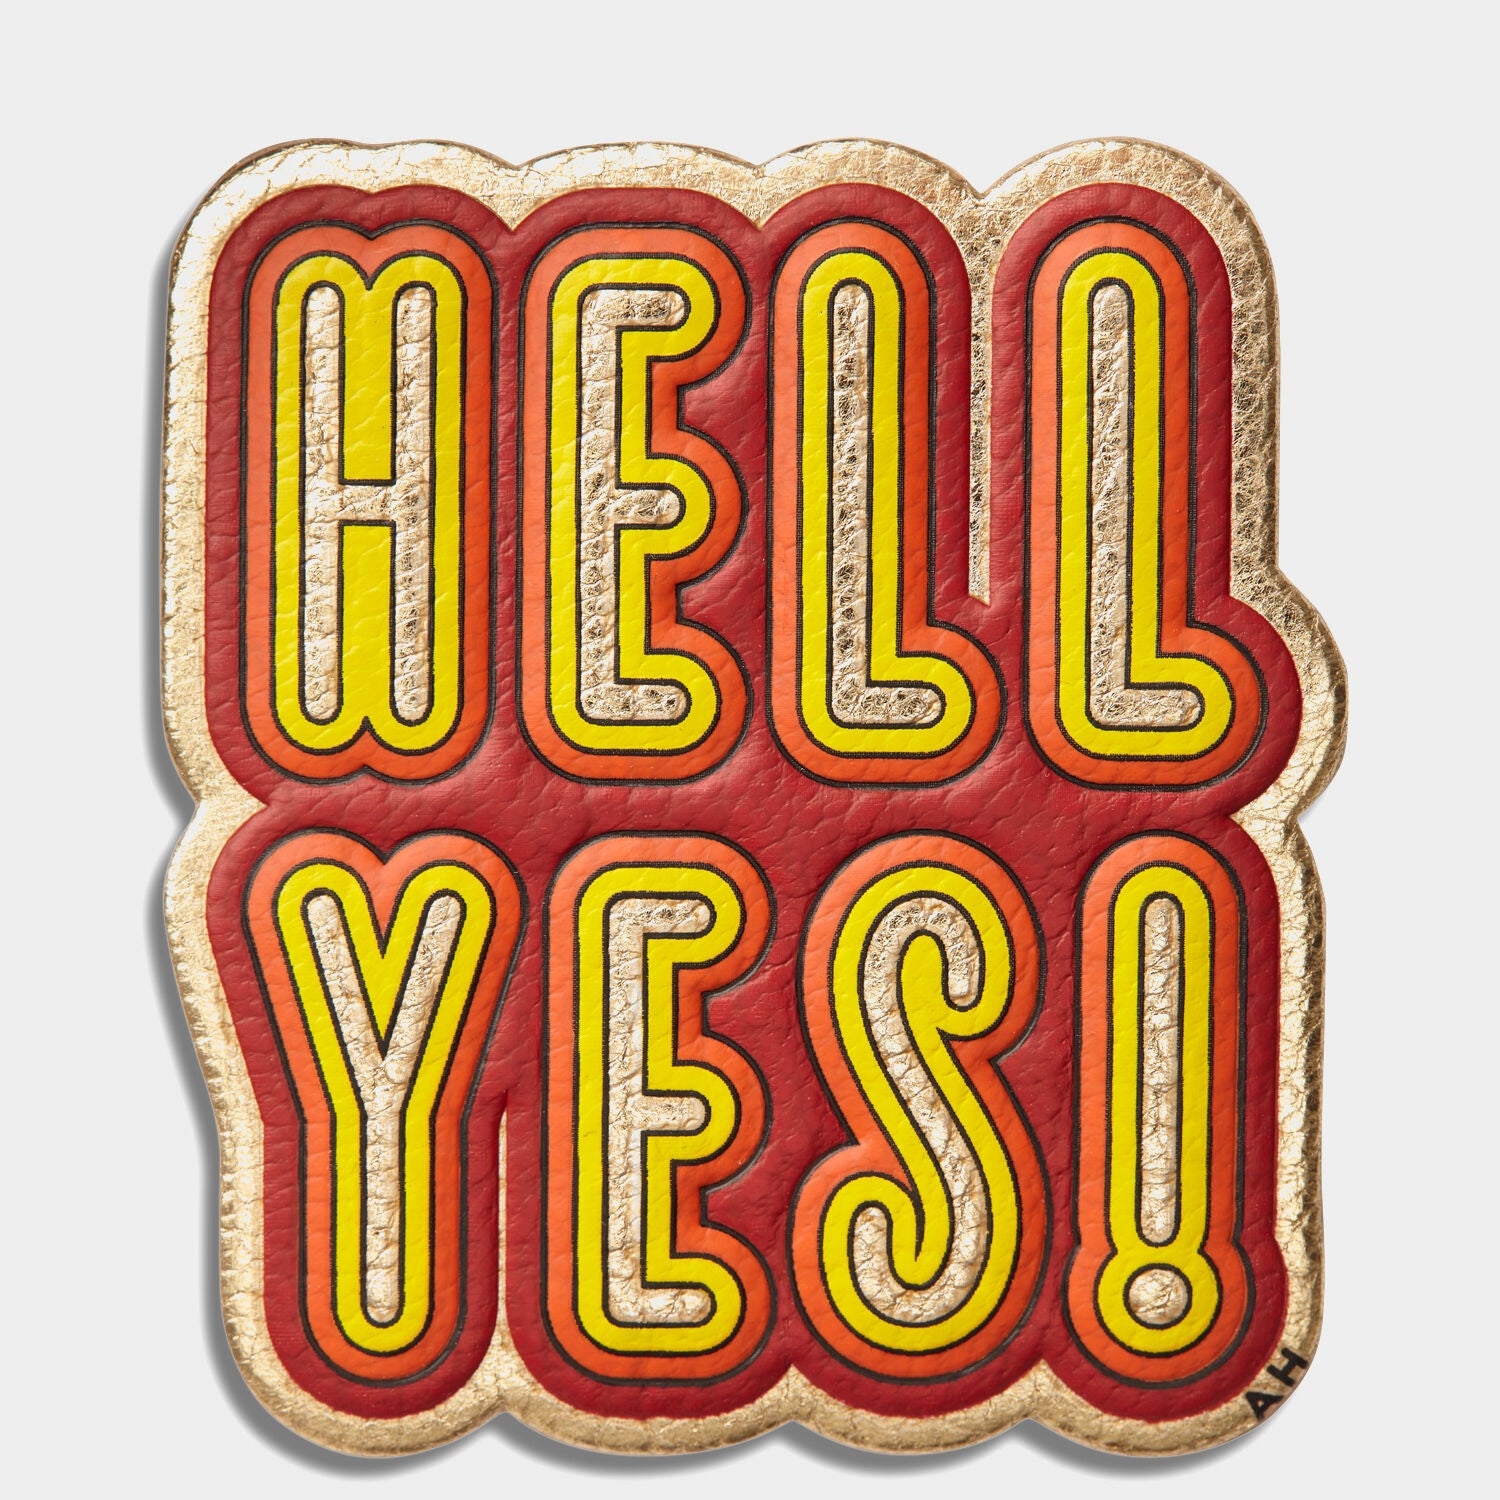 yes you can Sticker for Sale by emmagracehodge